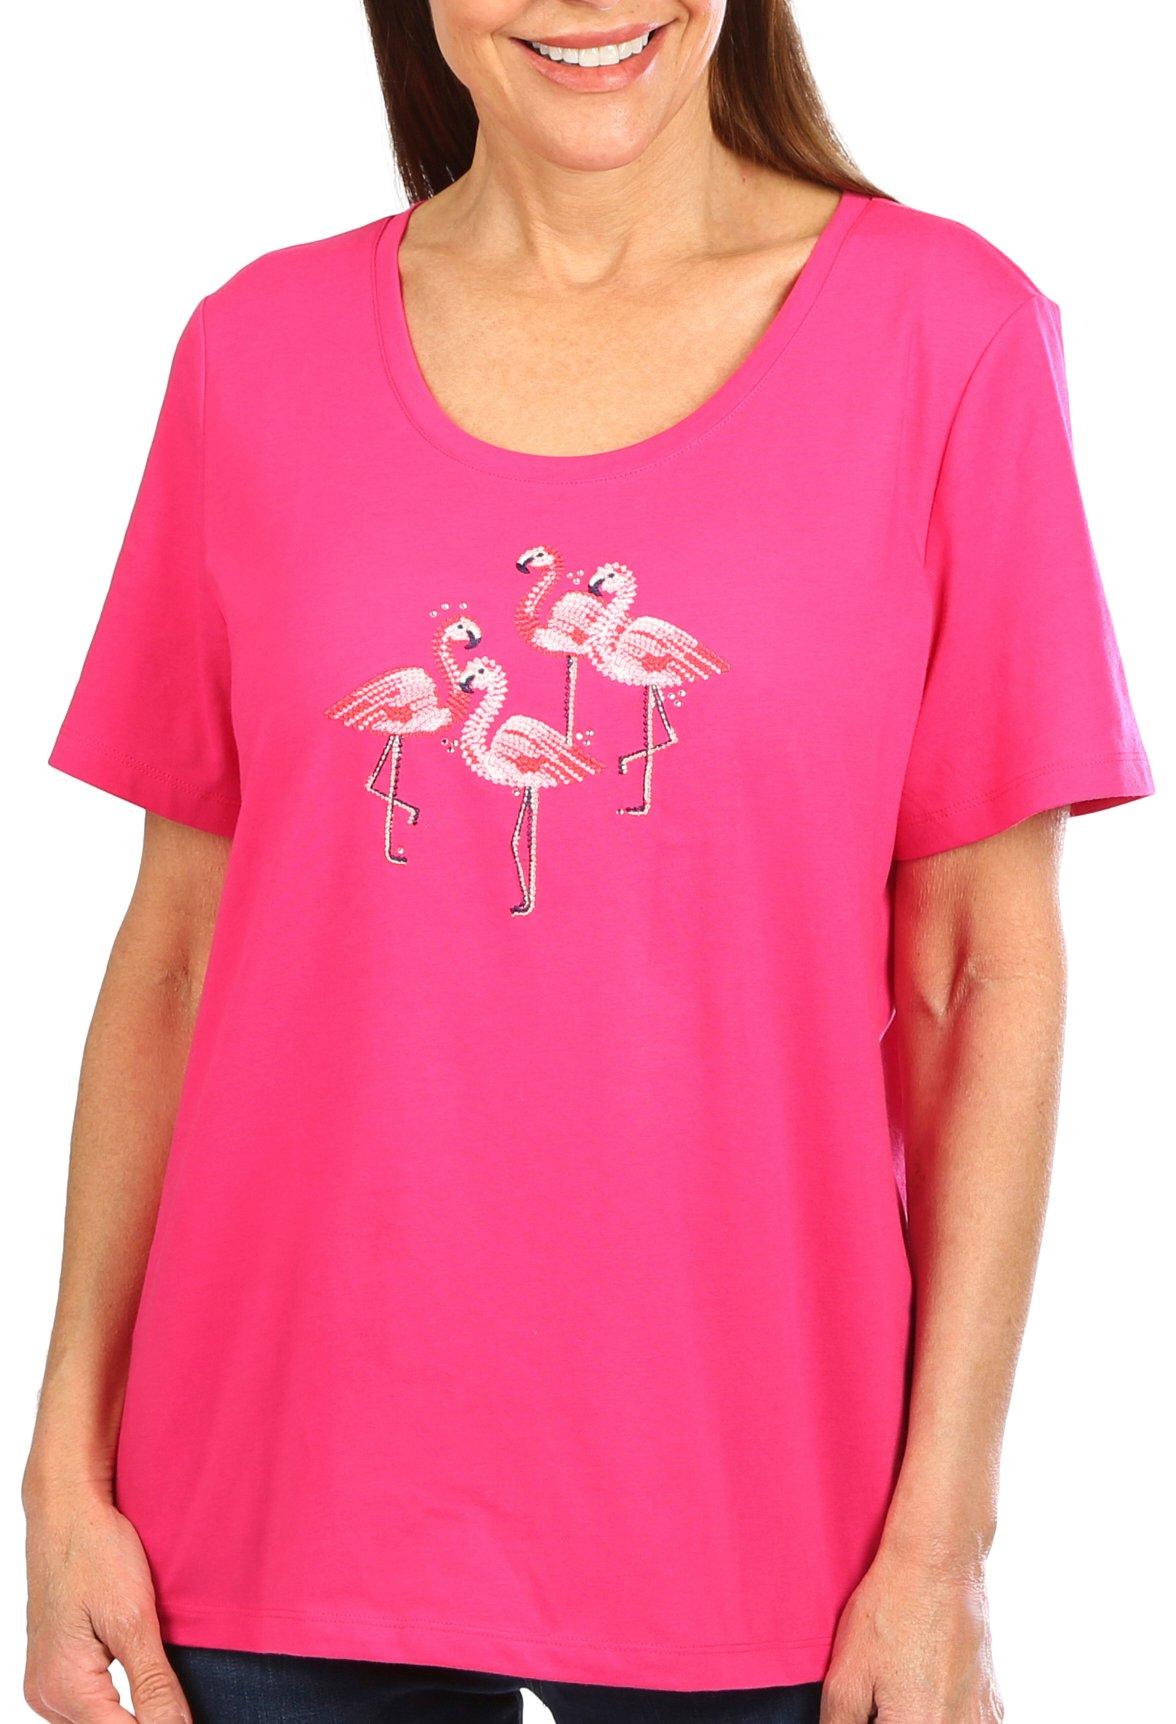 Coral Bay Womens Embroidered Flamingo Short Sleeve Top